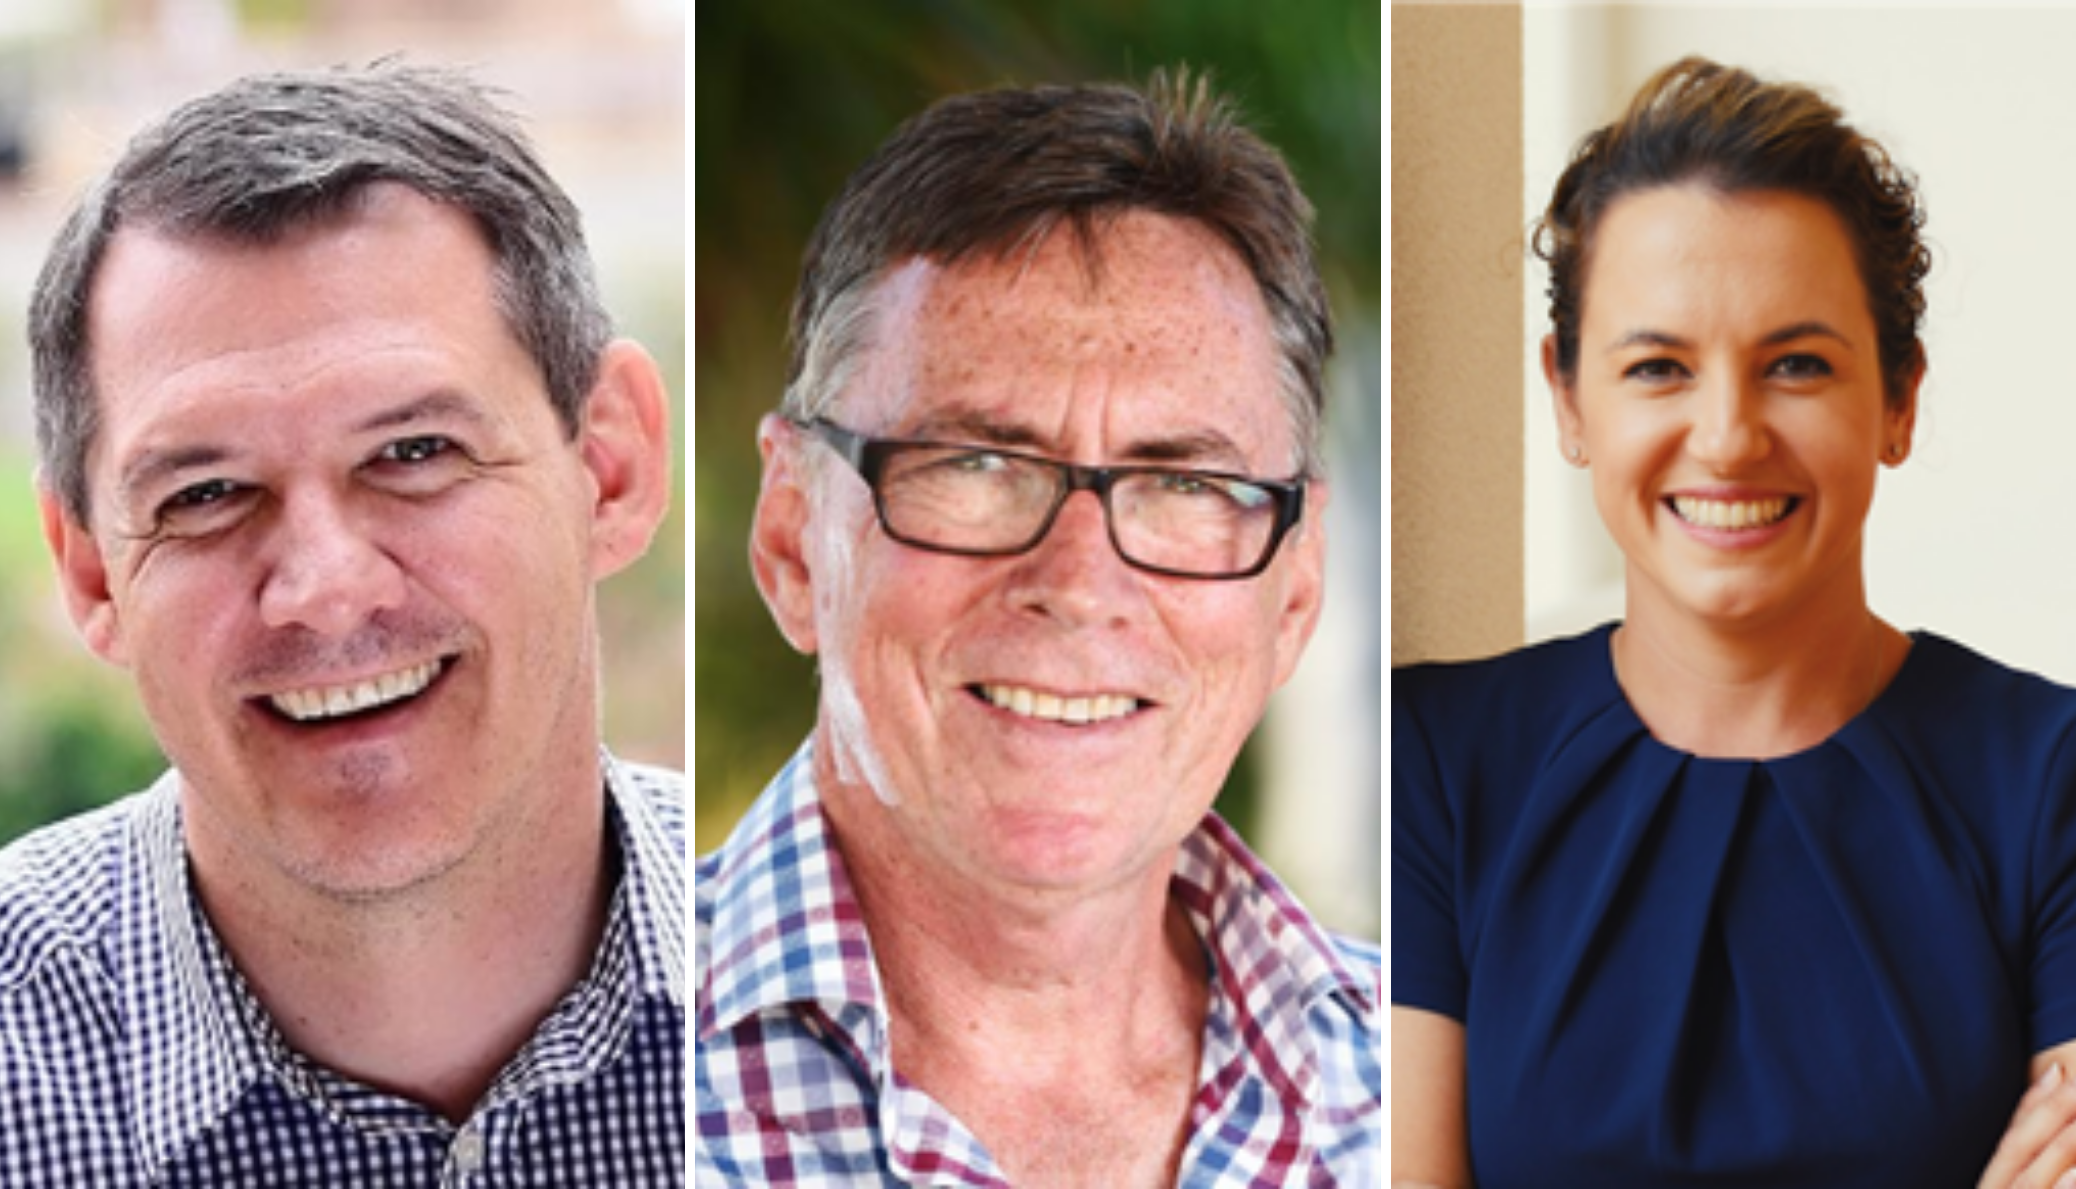 UP FOR GRABS: TOO CLOSE TO CALL IN THE NORTHERN TERRITORY